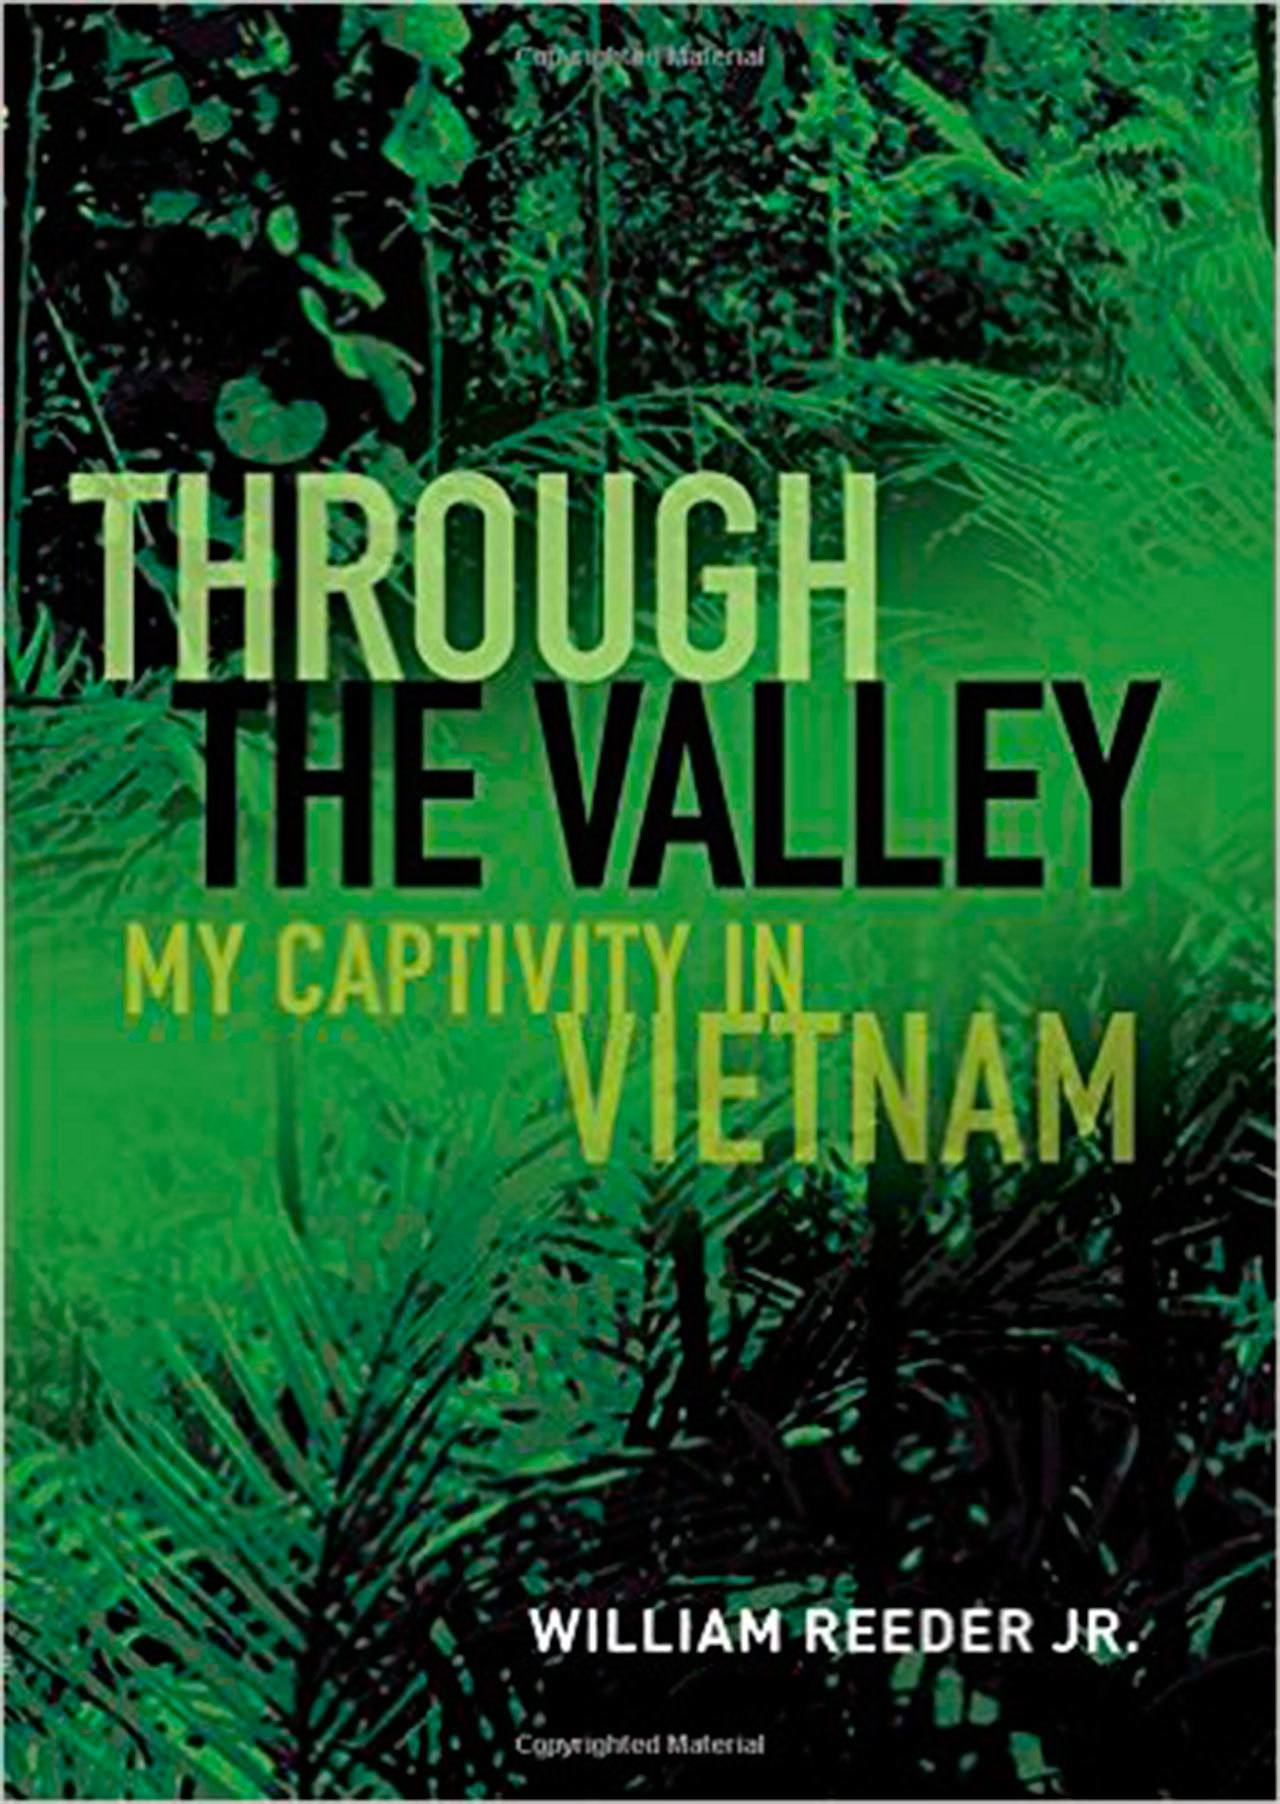 Image courtesy of Eagle Harbor Book Company                                William Reeder Jr., a former U.S. Army pilot and POW in Vietnam, will be the featured author at the first announced event of 2017 at Eagle Harbor Book Company, when he visits the shop at 3 p.m. Sunday, Jan. 8 to discuss his memoir “Through the Valley: My Captivity in Vietnam.”